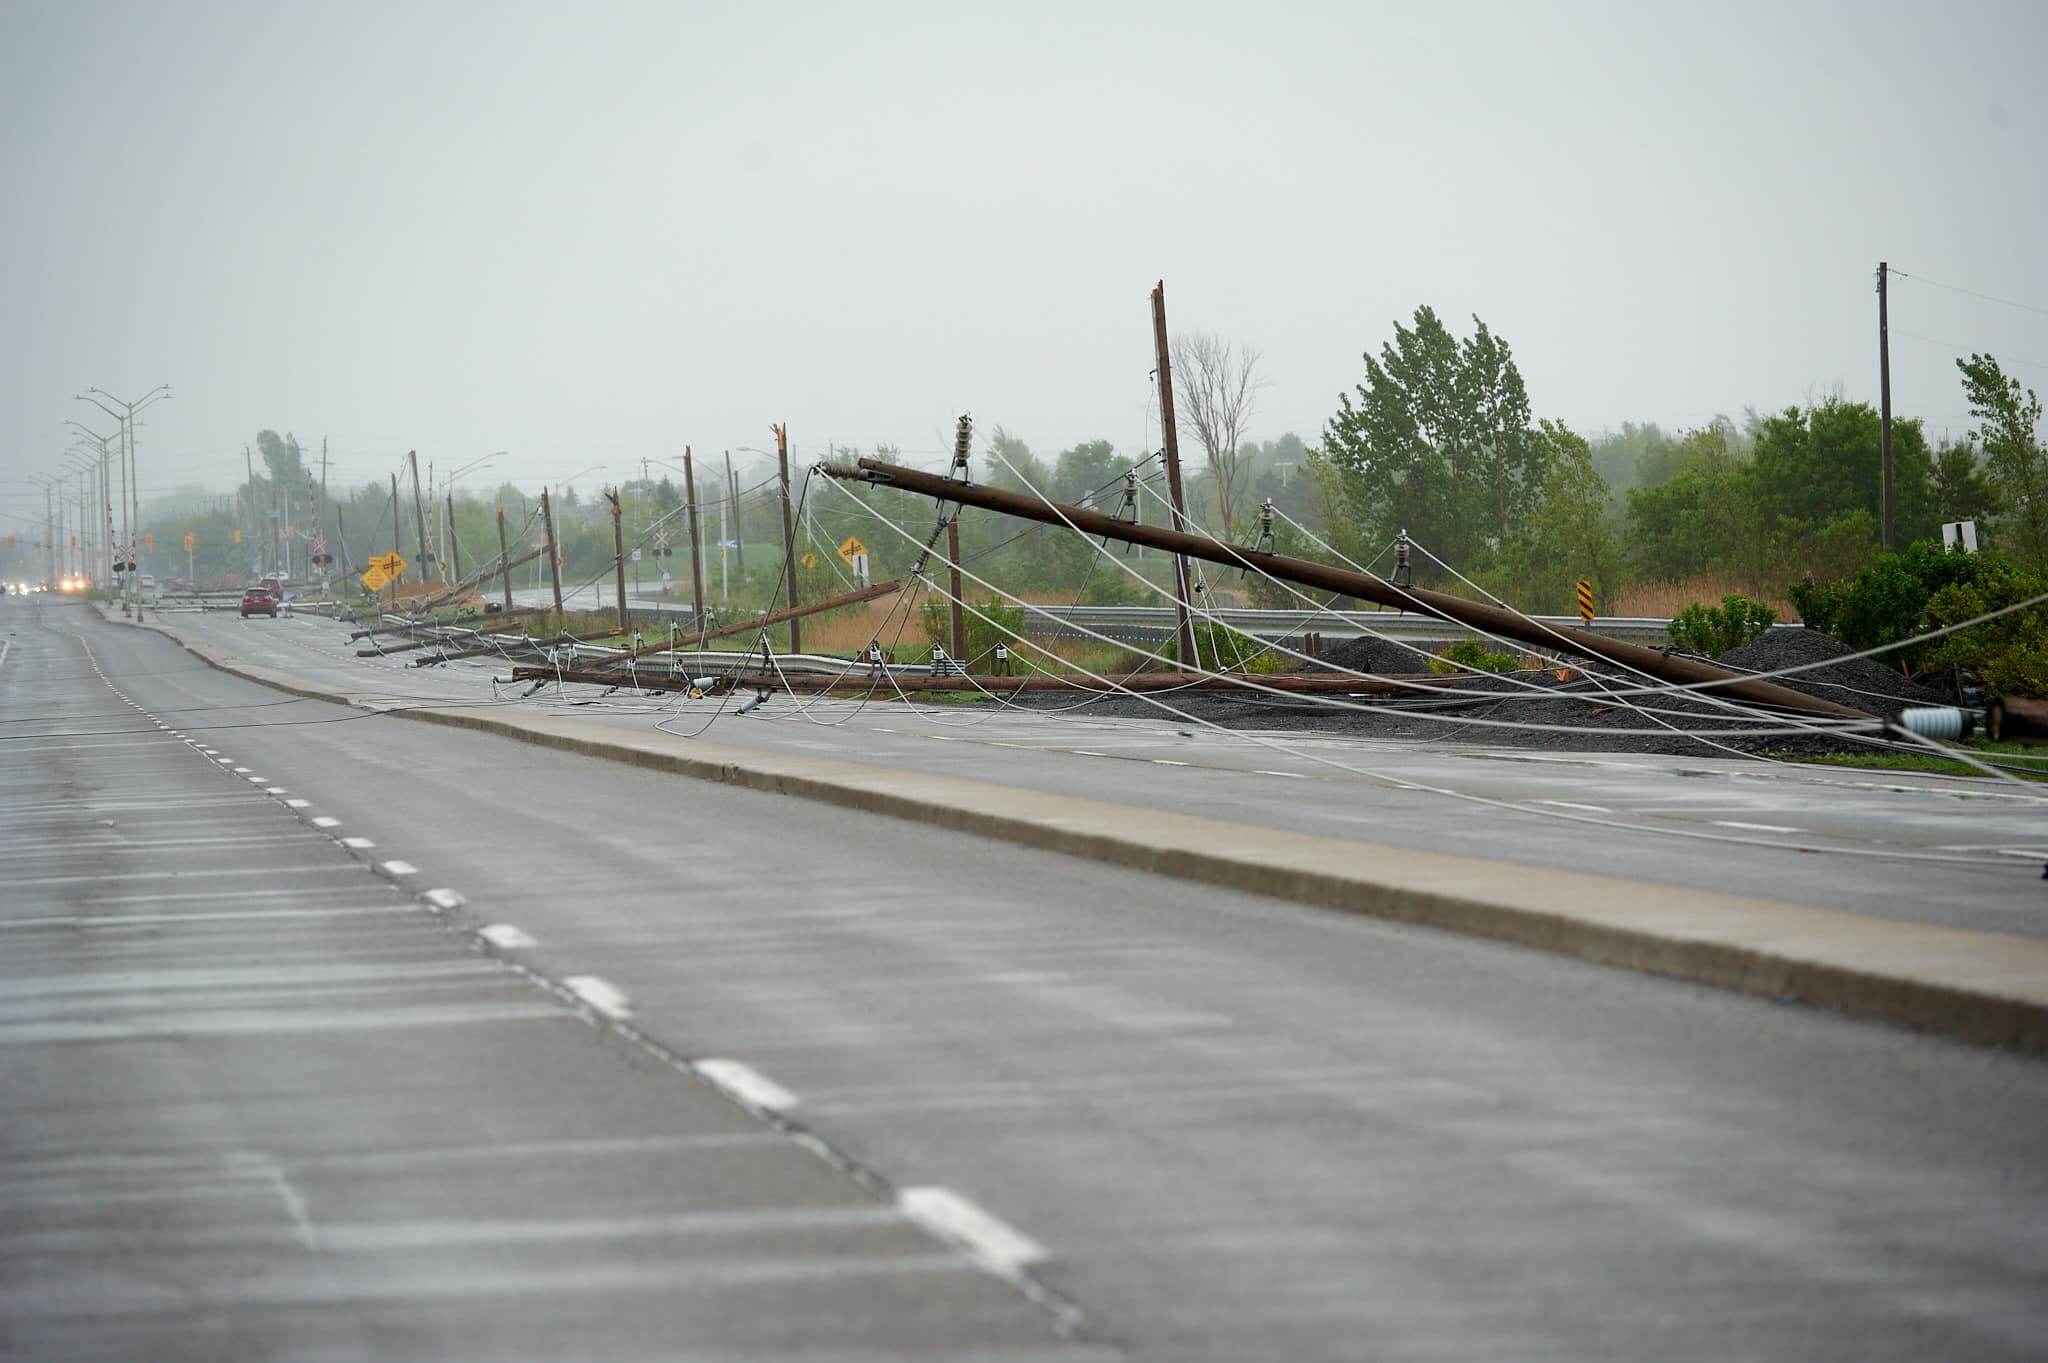 Image of downed power poles on a street.